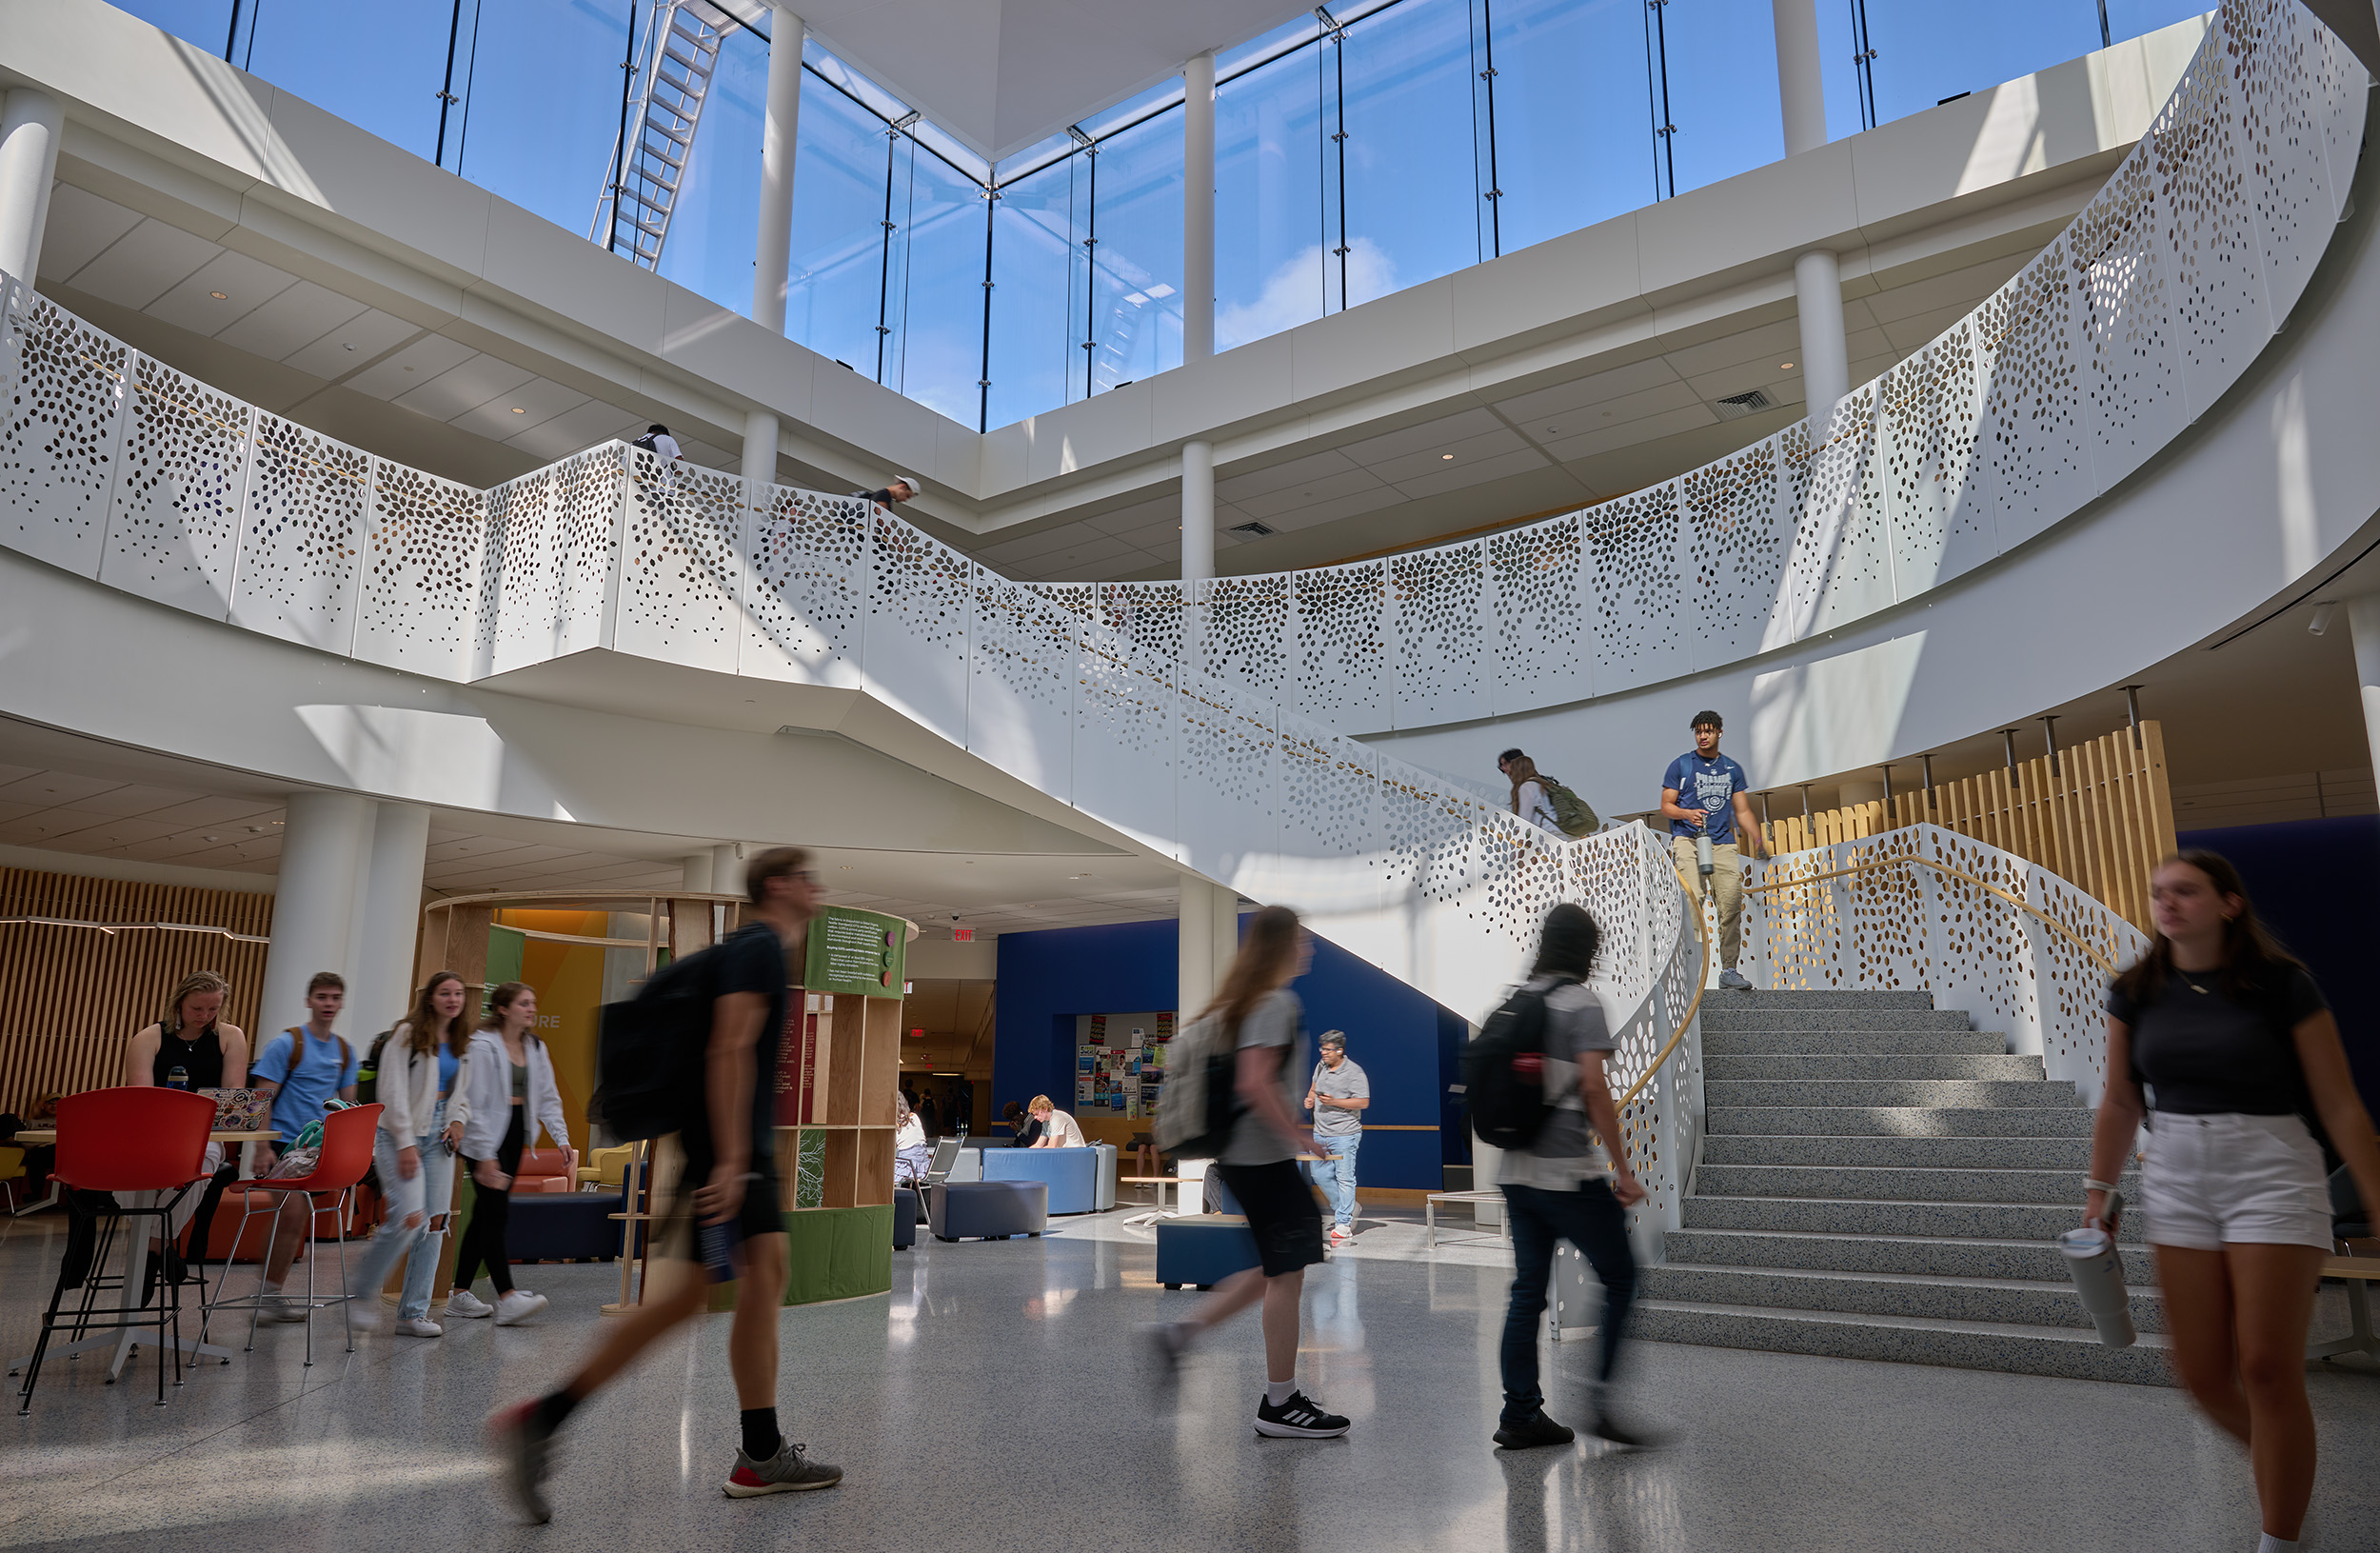 Inside The Gant Science Complex